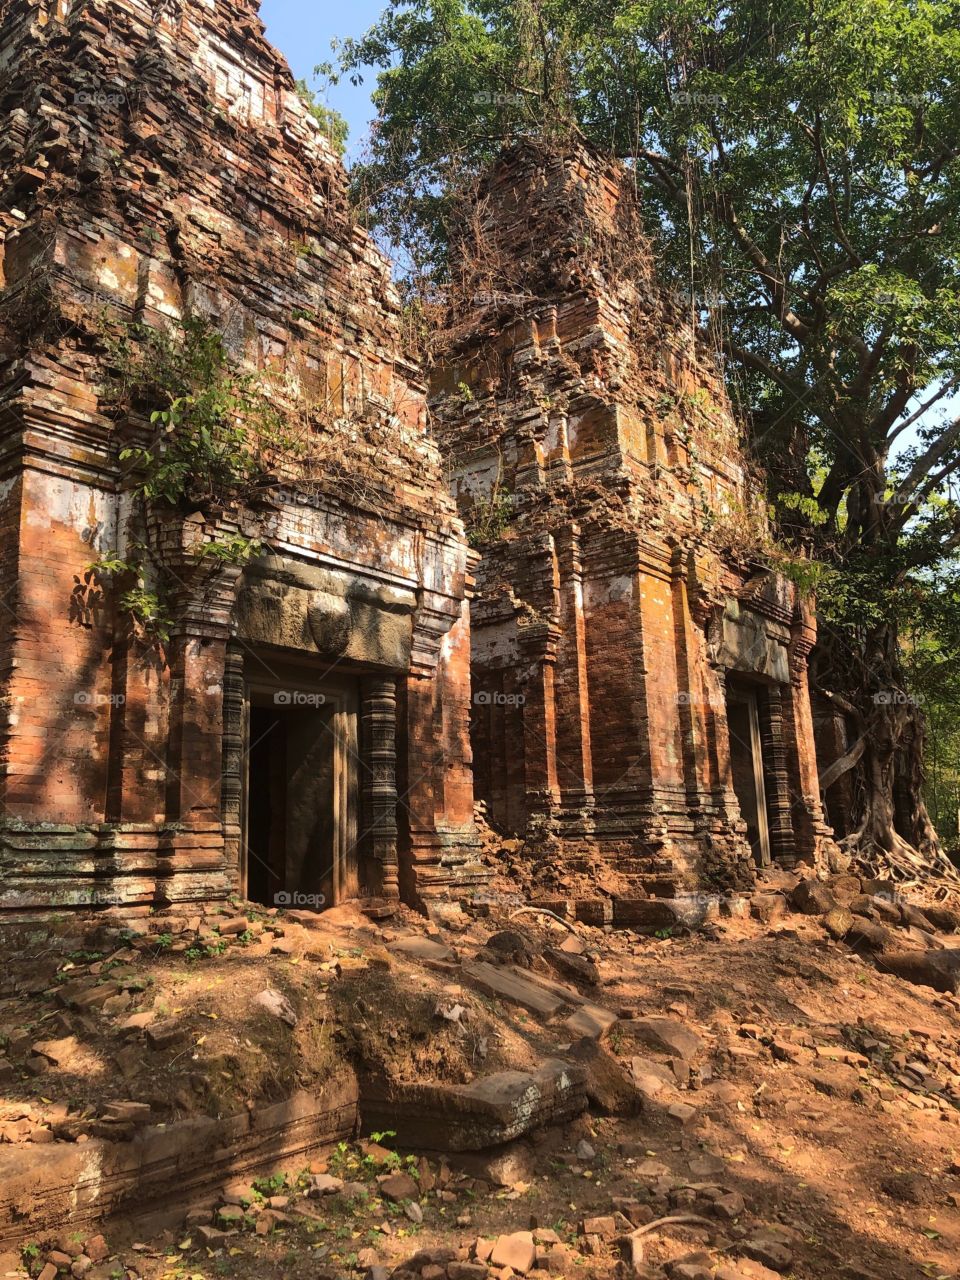 Hindu and Buddhist Ruins in The Jungle and Rainforest in Rural Cambodia. Chelsea Merkley Photography 2019. Chelsea Merkley Photos. 